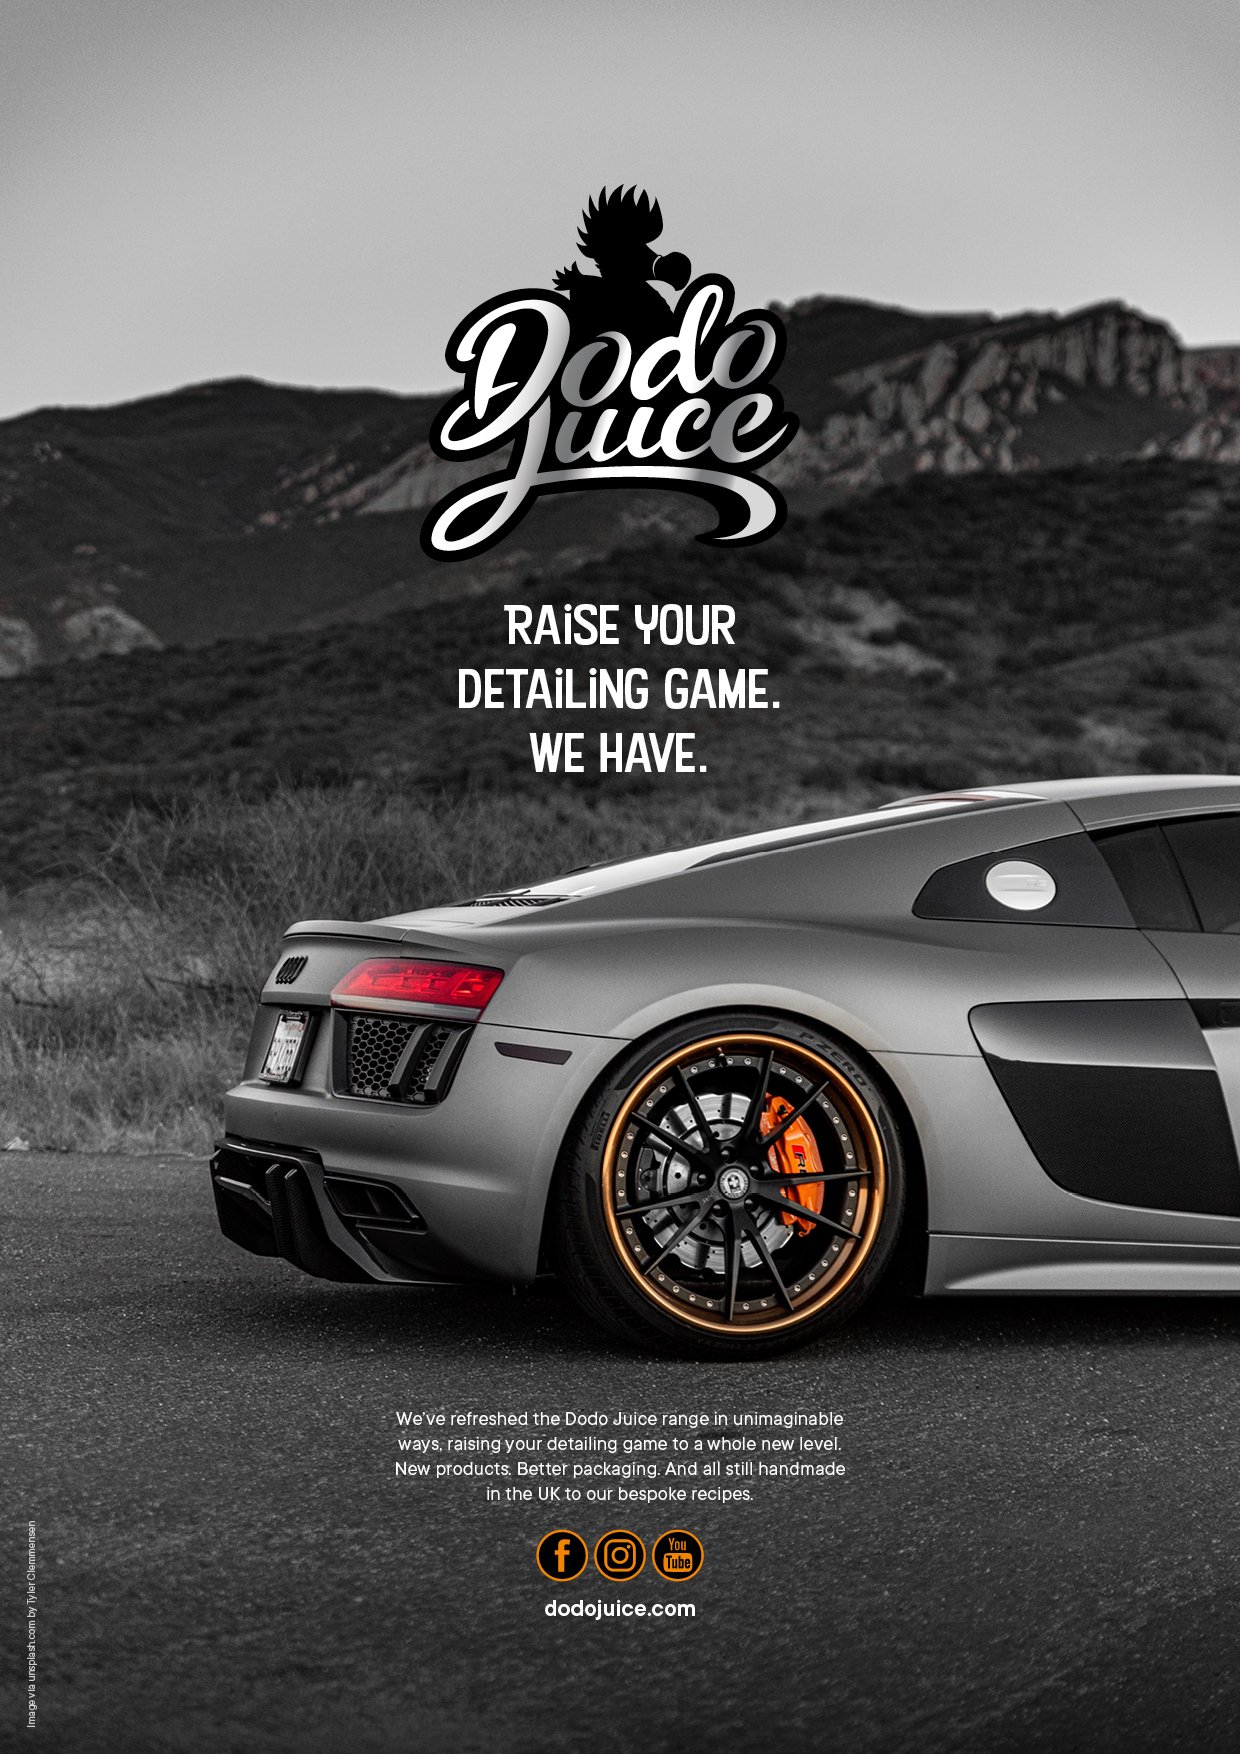 Dodo Juice 'Raise your detailing game' poster